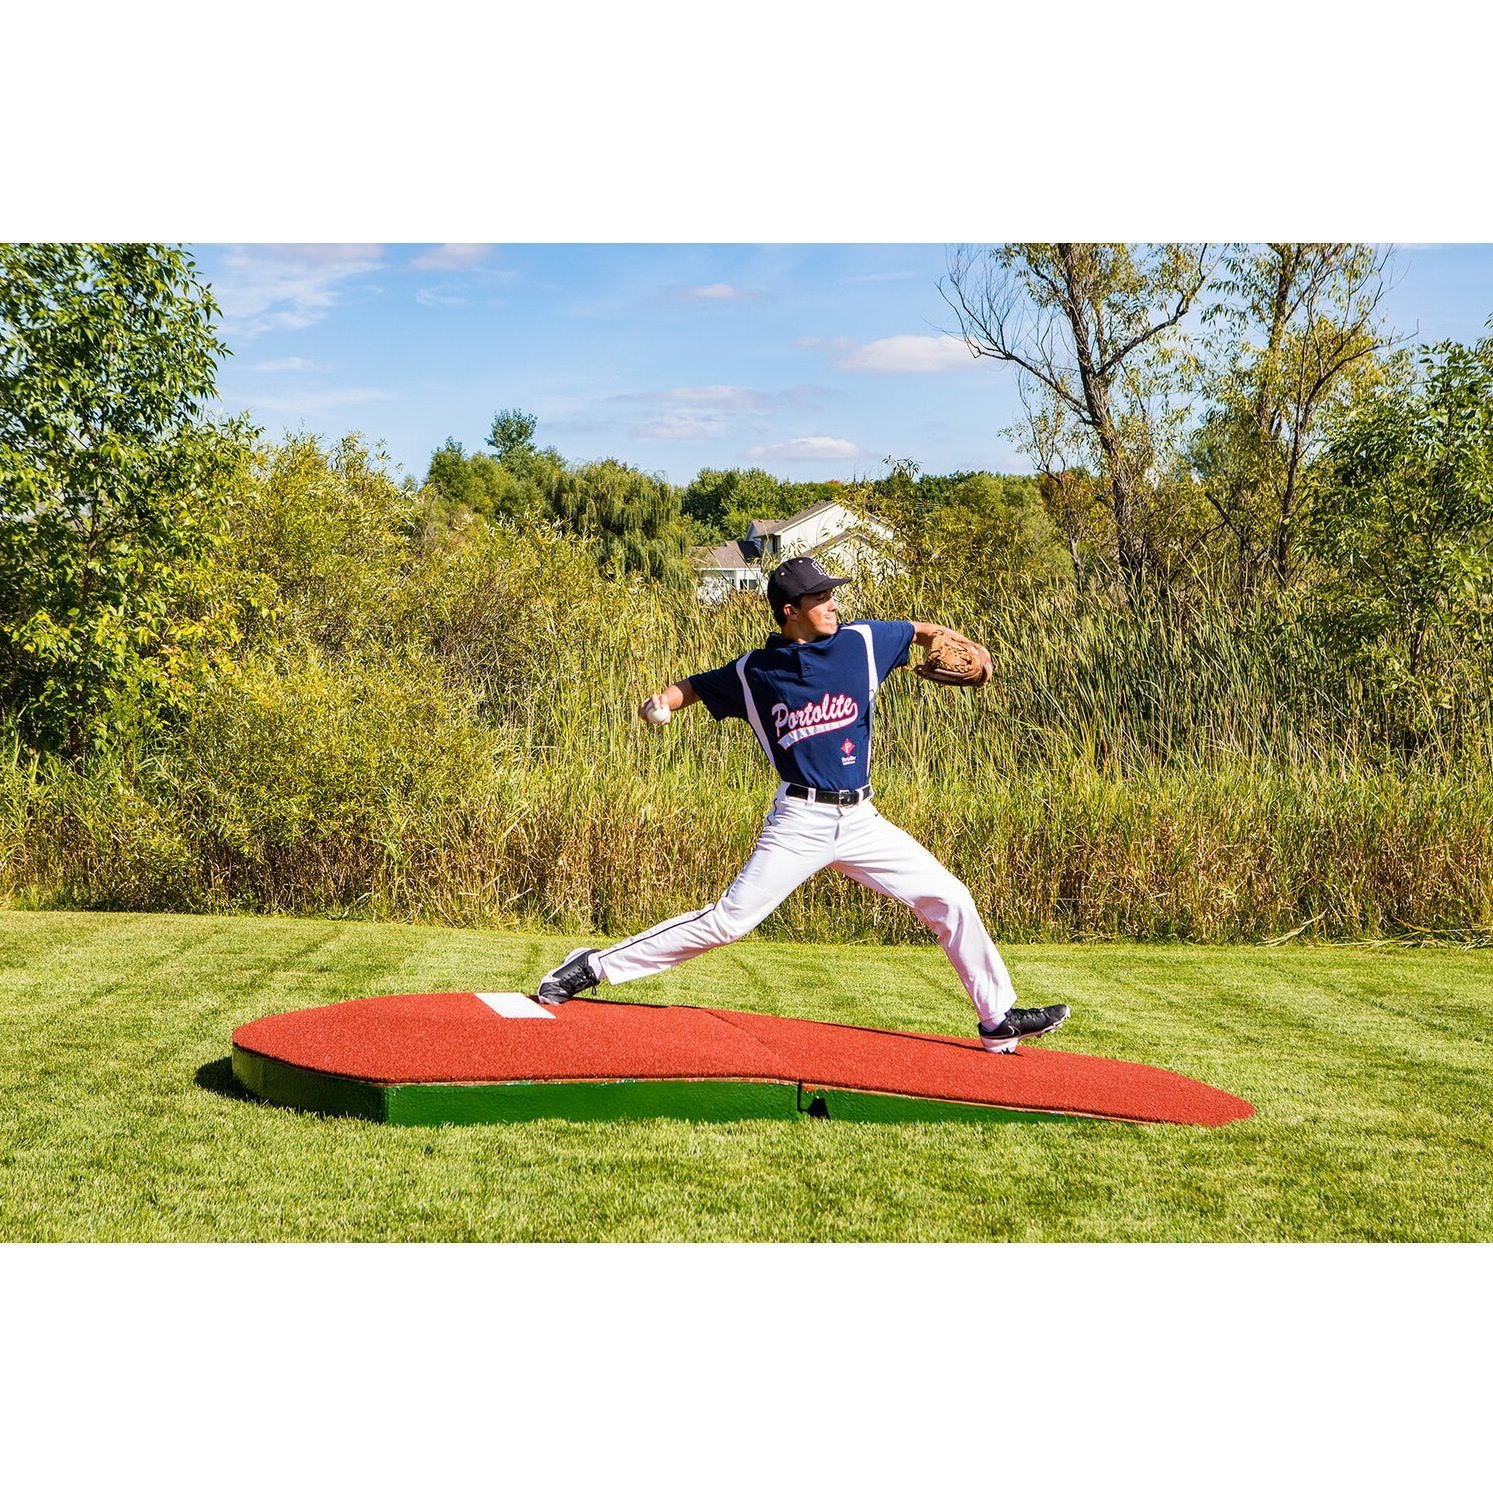 Portolite 10" Two-Piece Portable Pitching Mound red pitcher stride